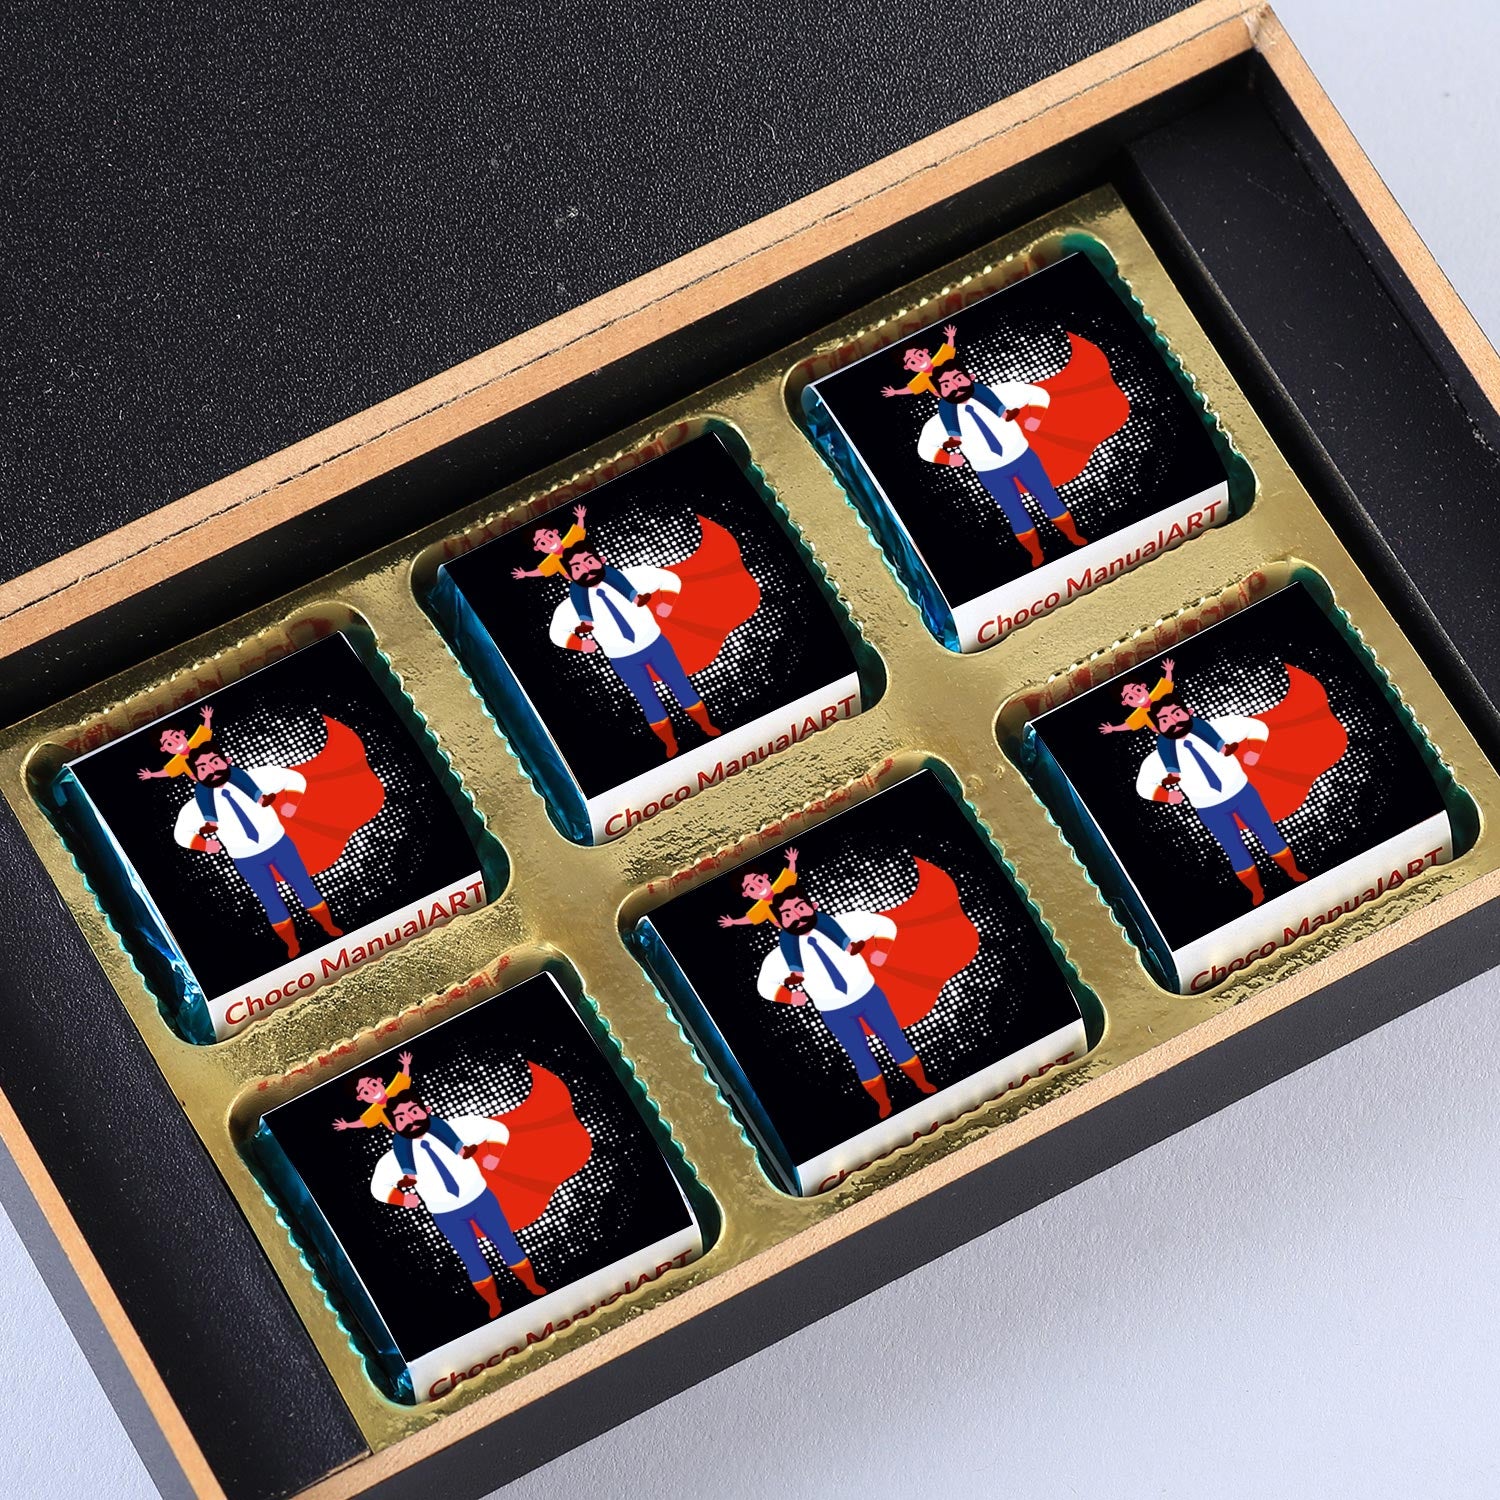 customized black wooden box with all wrapper printed chocolates. There is also a personalized message printed on Message paper inside the box.